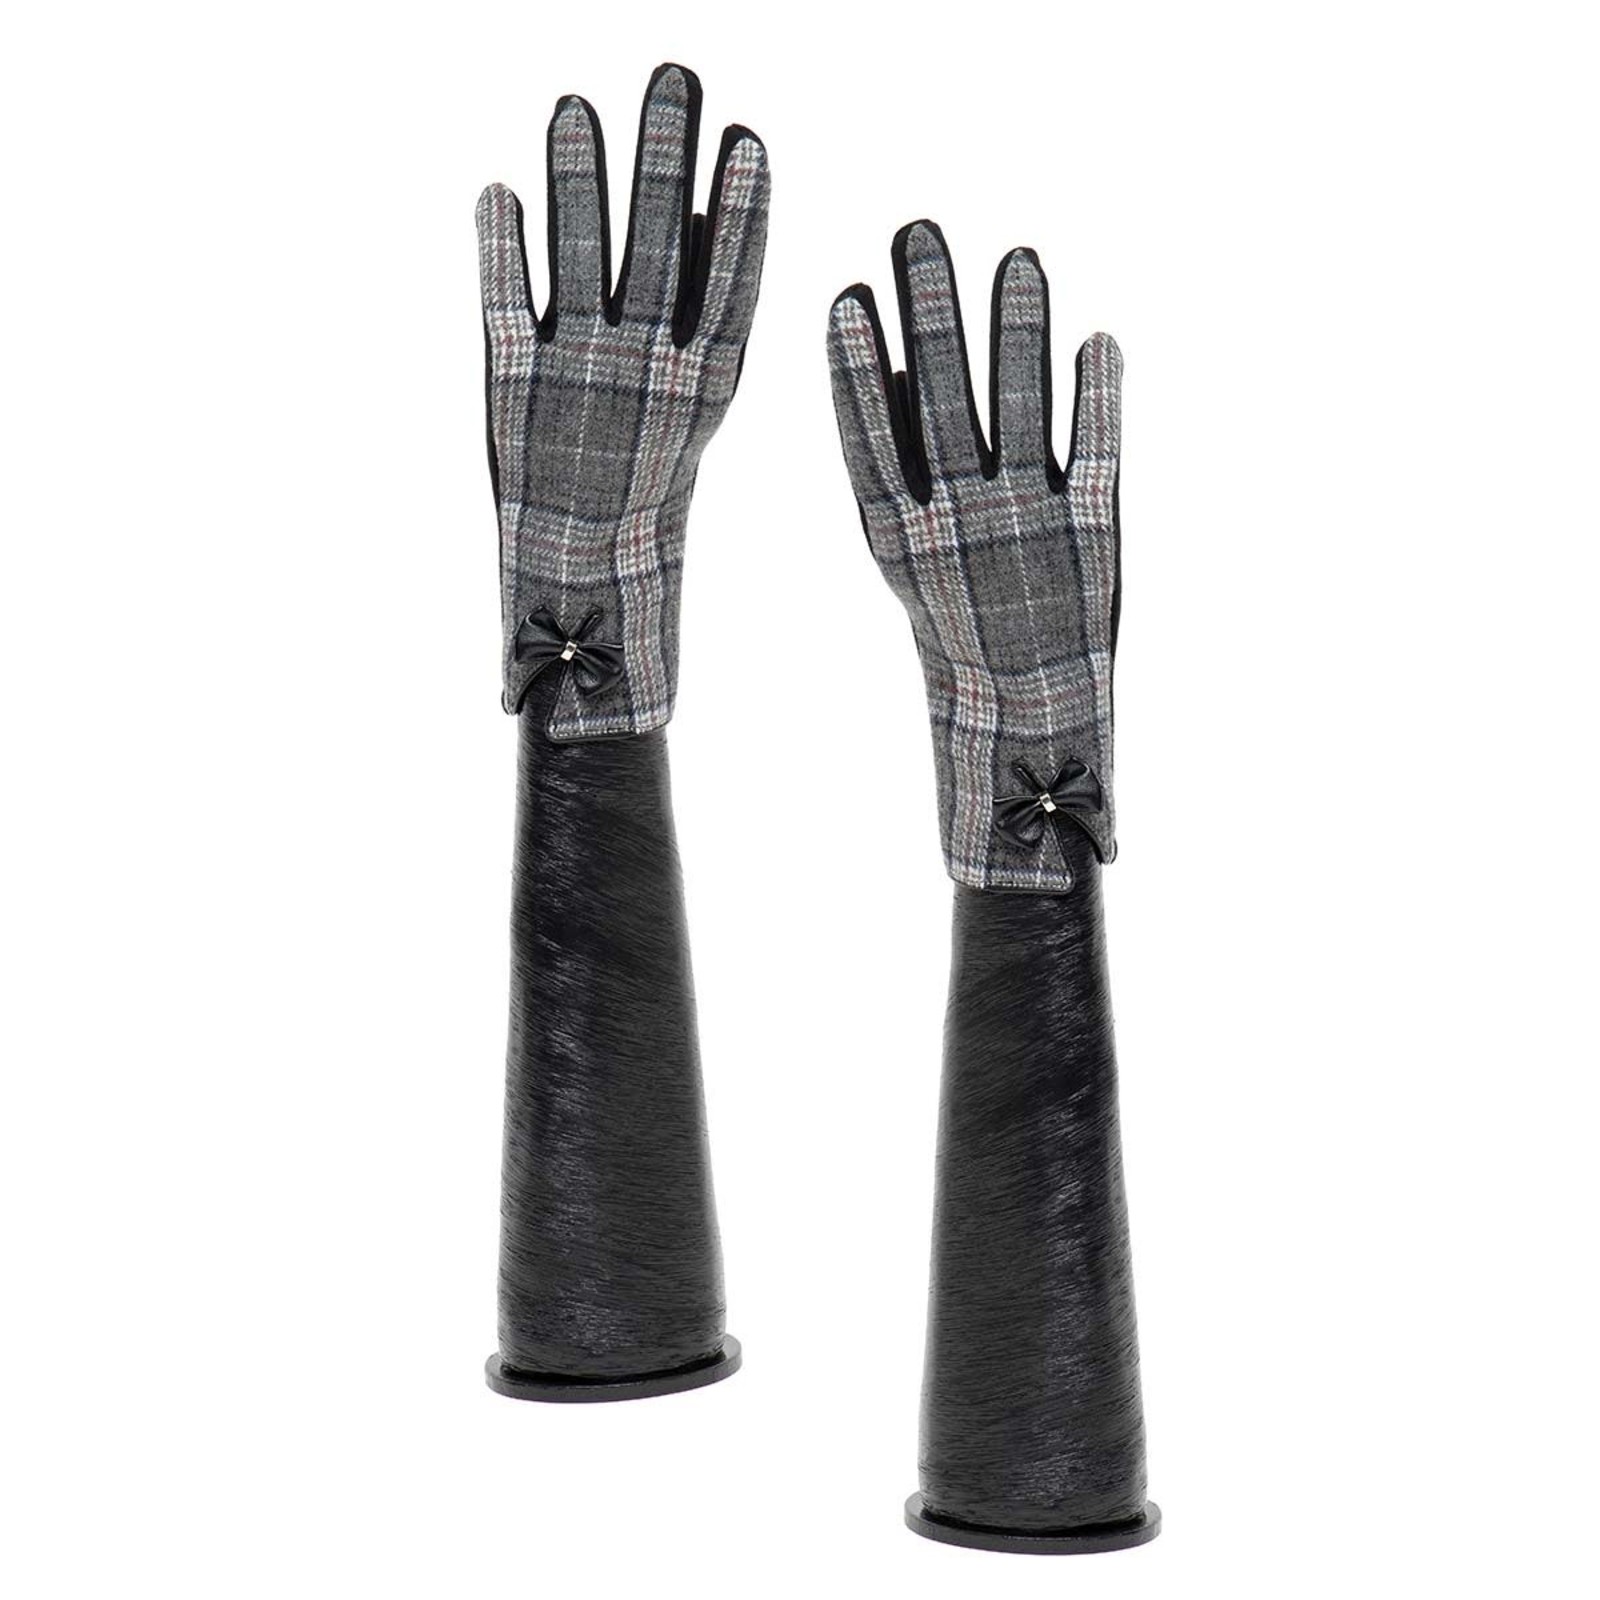 Meravic Grey/ Brown Plaid Gloves with Bow and Black Palm X8038 loading=